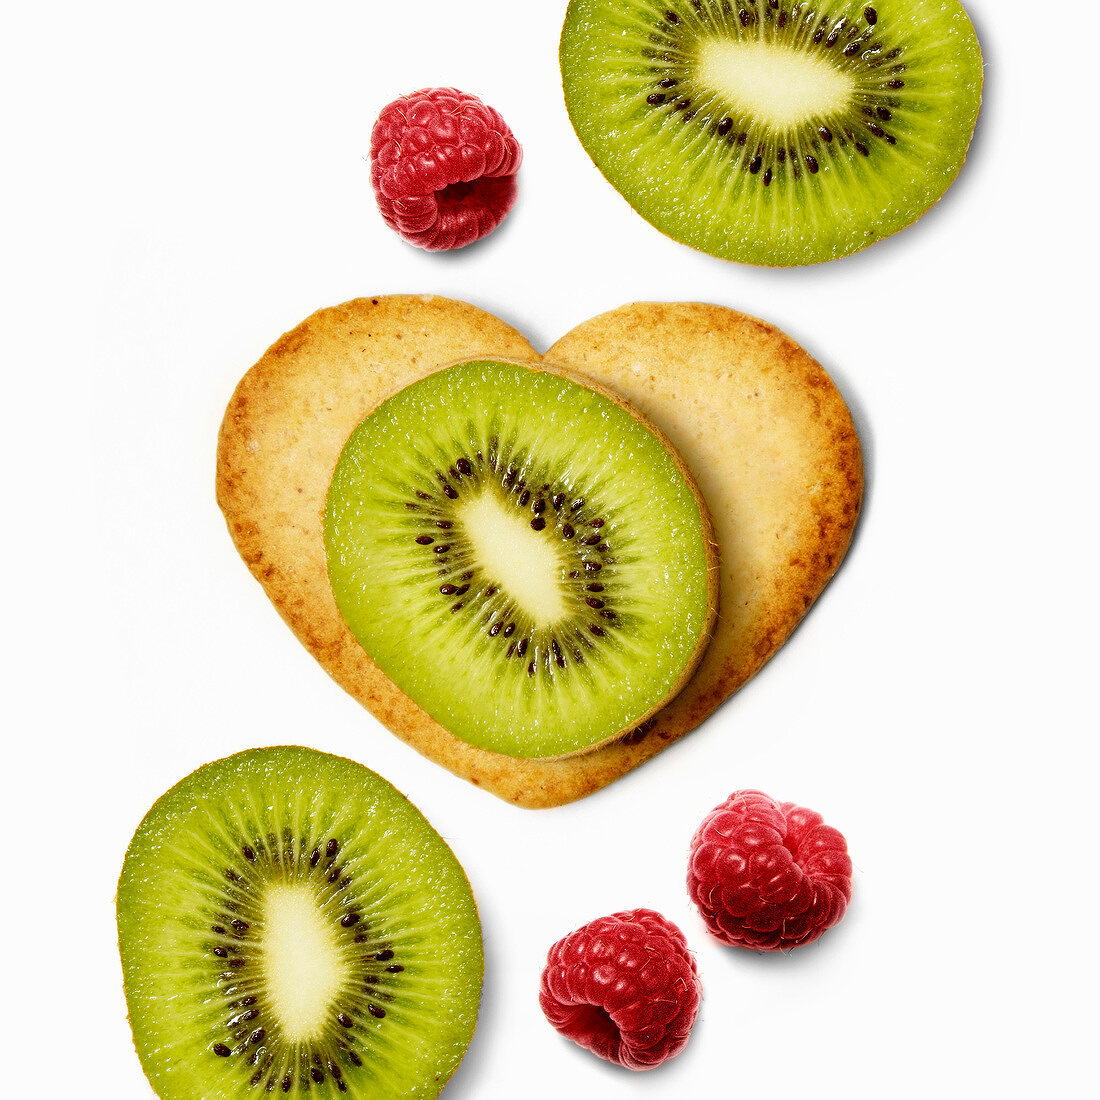 Heart-shaped biscuit with sliced kiwis and raspberries